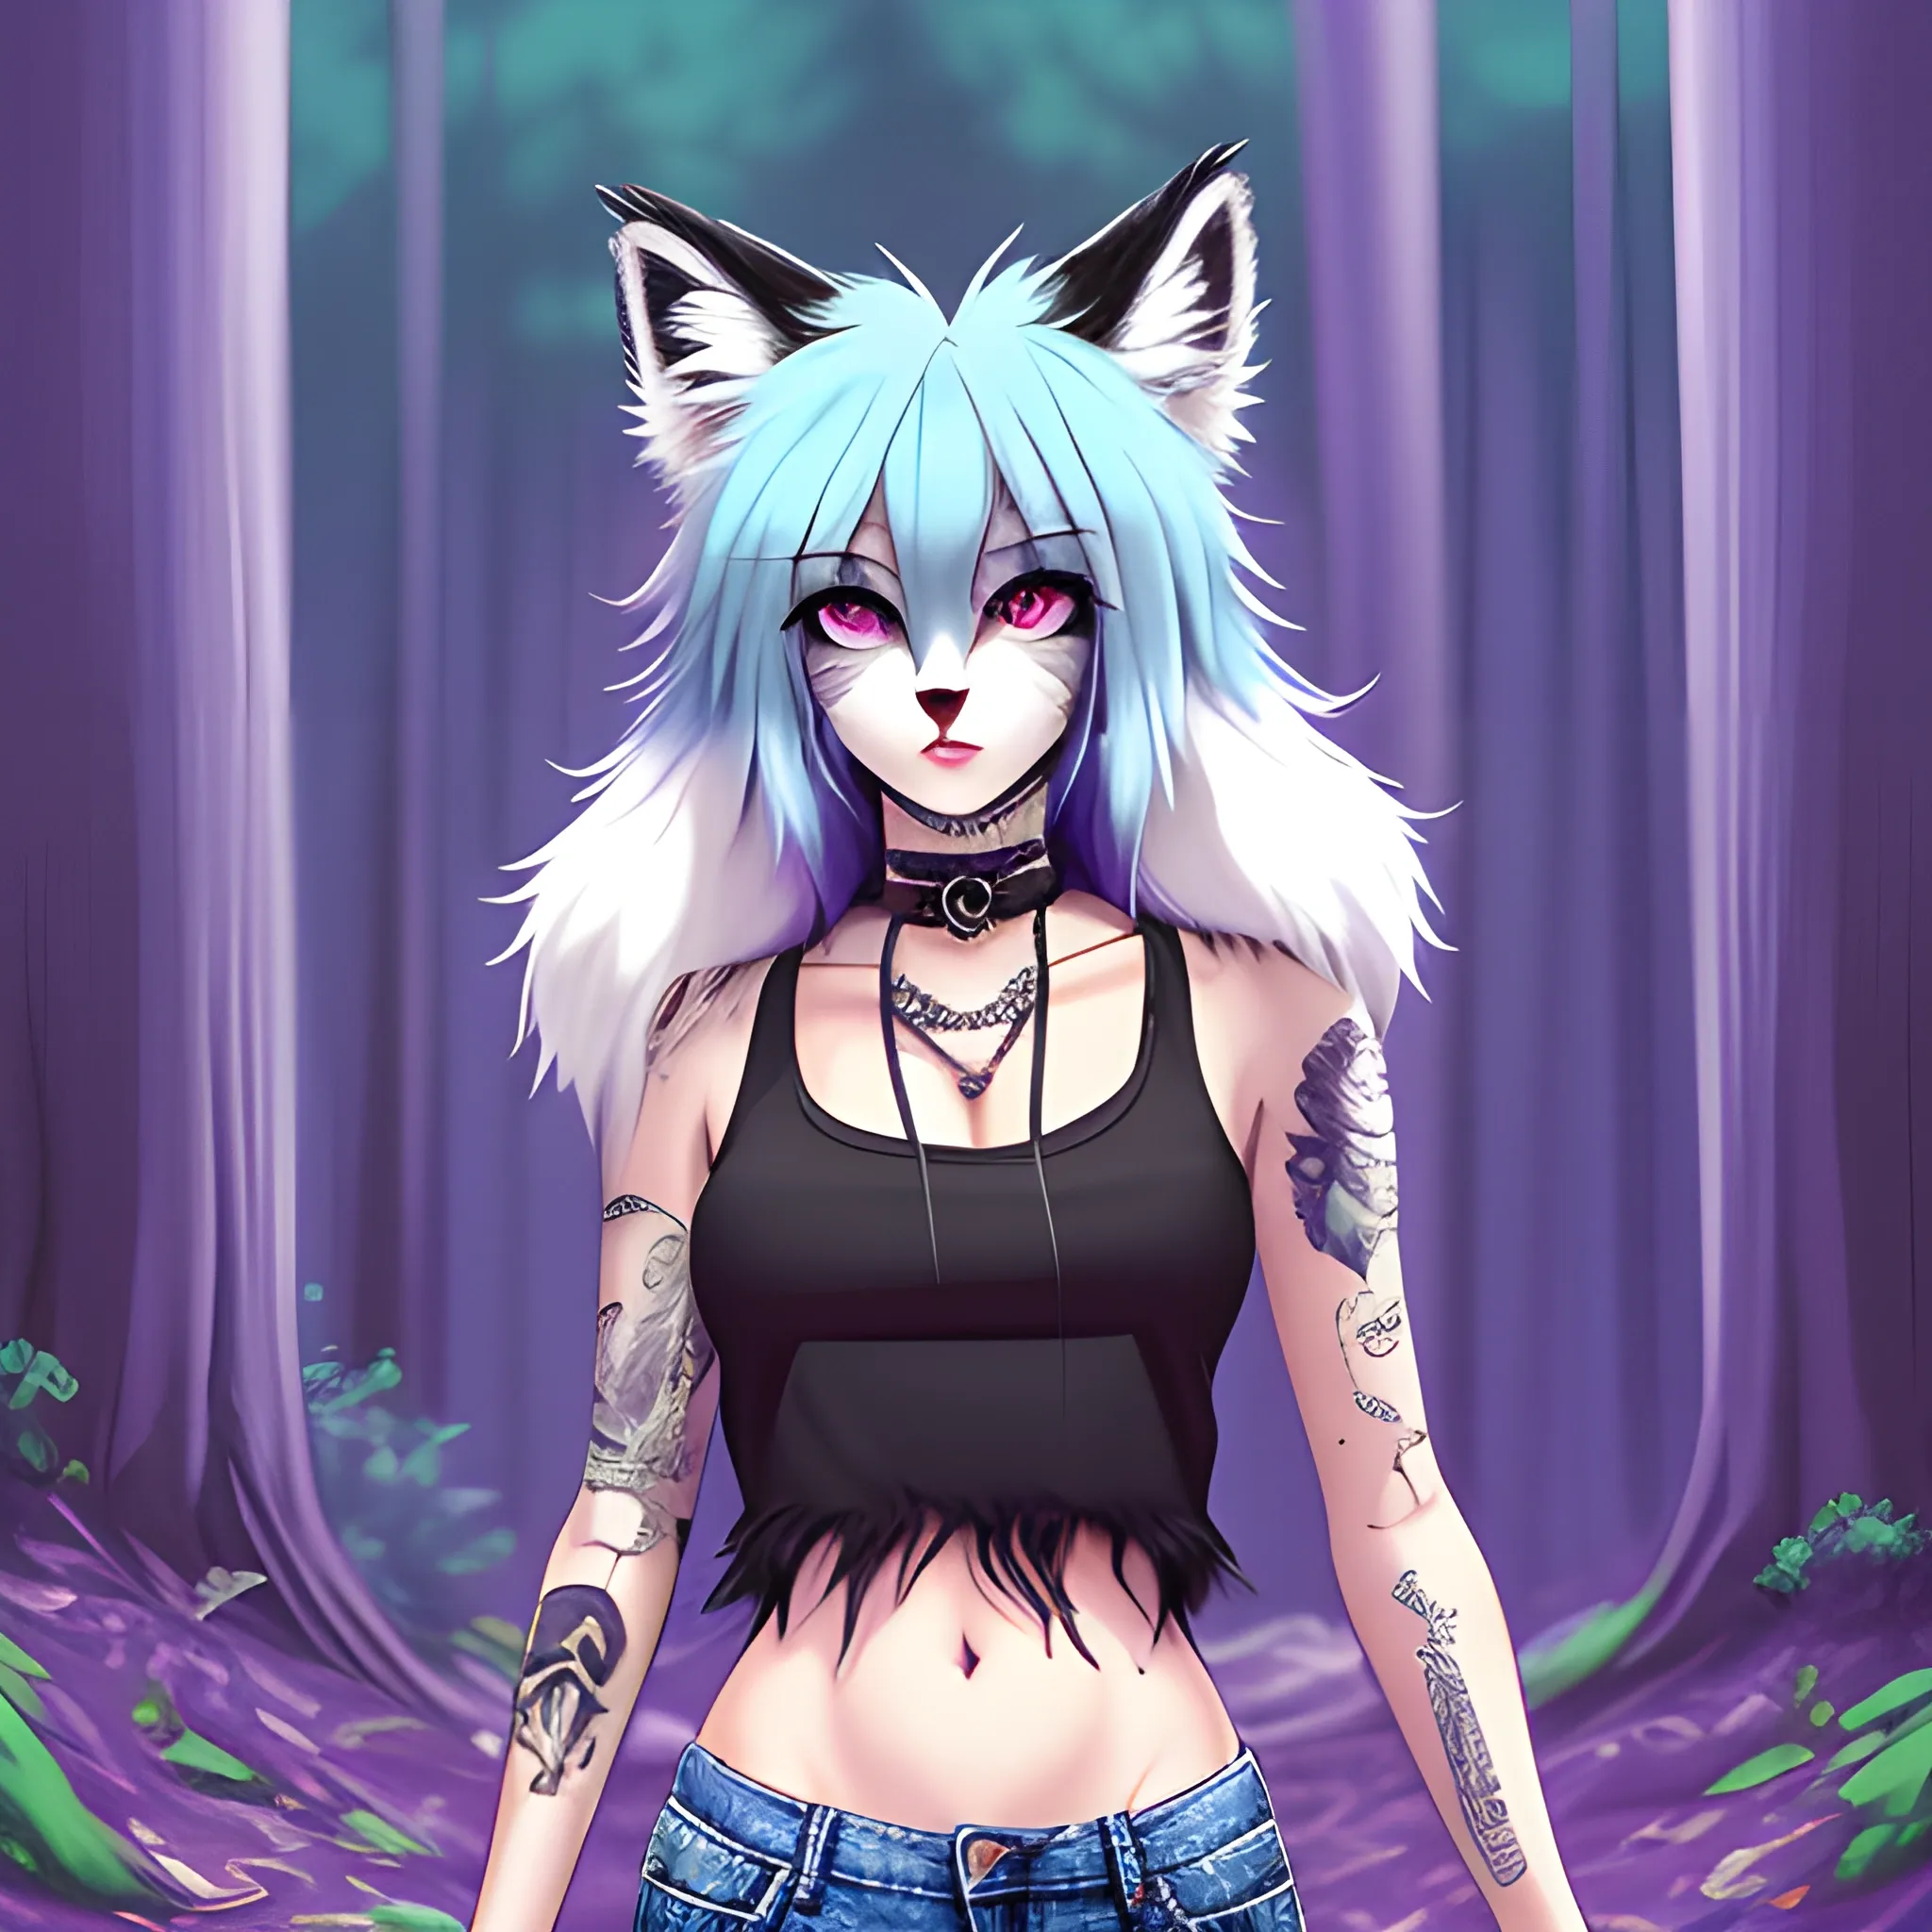 
(Furry Art)), fox Furry Woman with beautiful purple eyes, ((extra long fluffy cyan hair)) Fluffy tail, , standing, forest, tattoo, choker, looking at viewer, black Tank top with white fur jacket and jeans